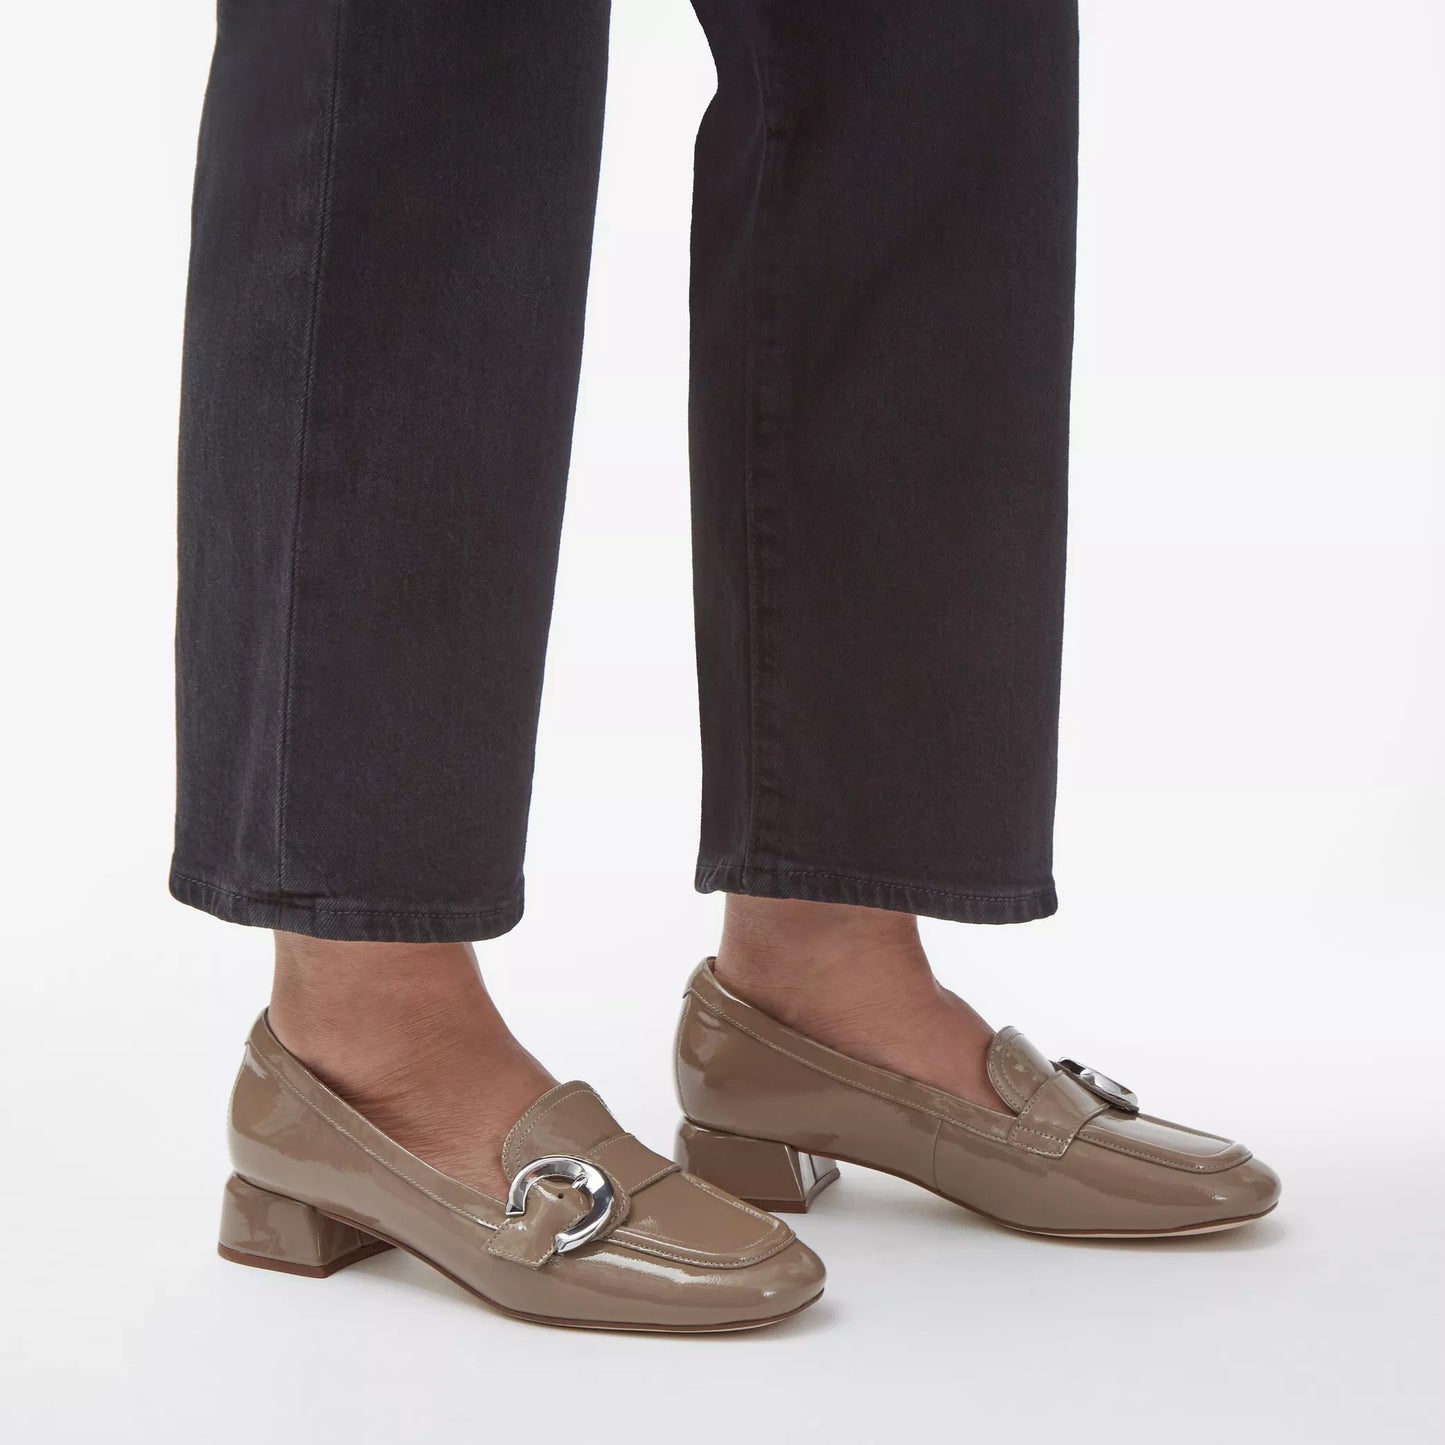 Clarks Daiss30 Trim Loafer - Pebble Patent